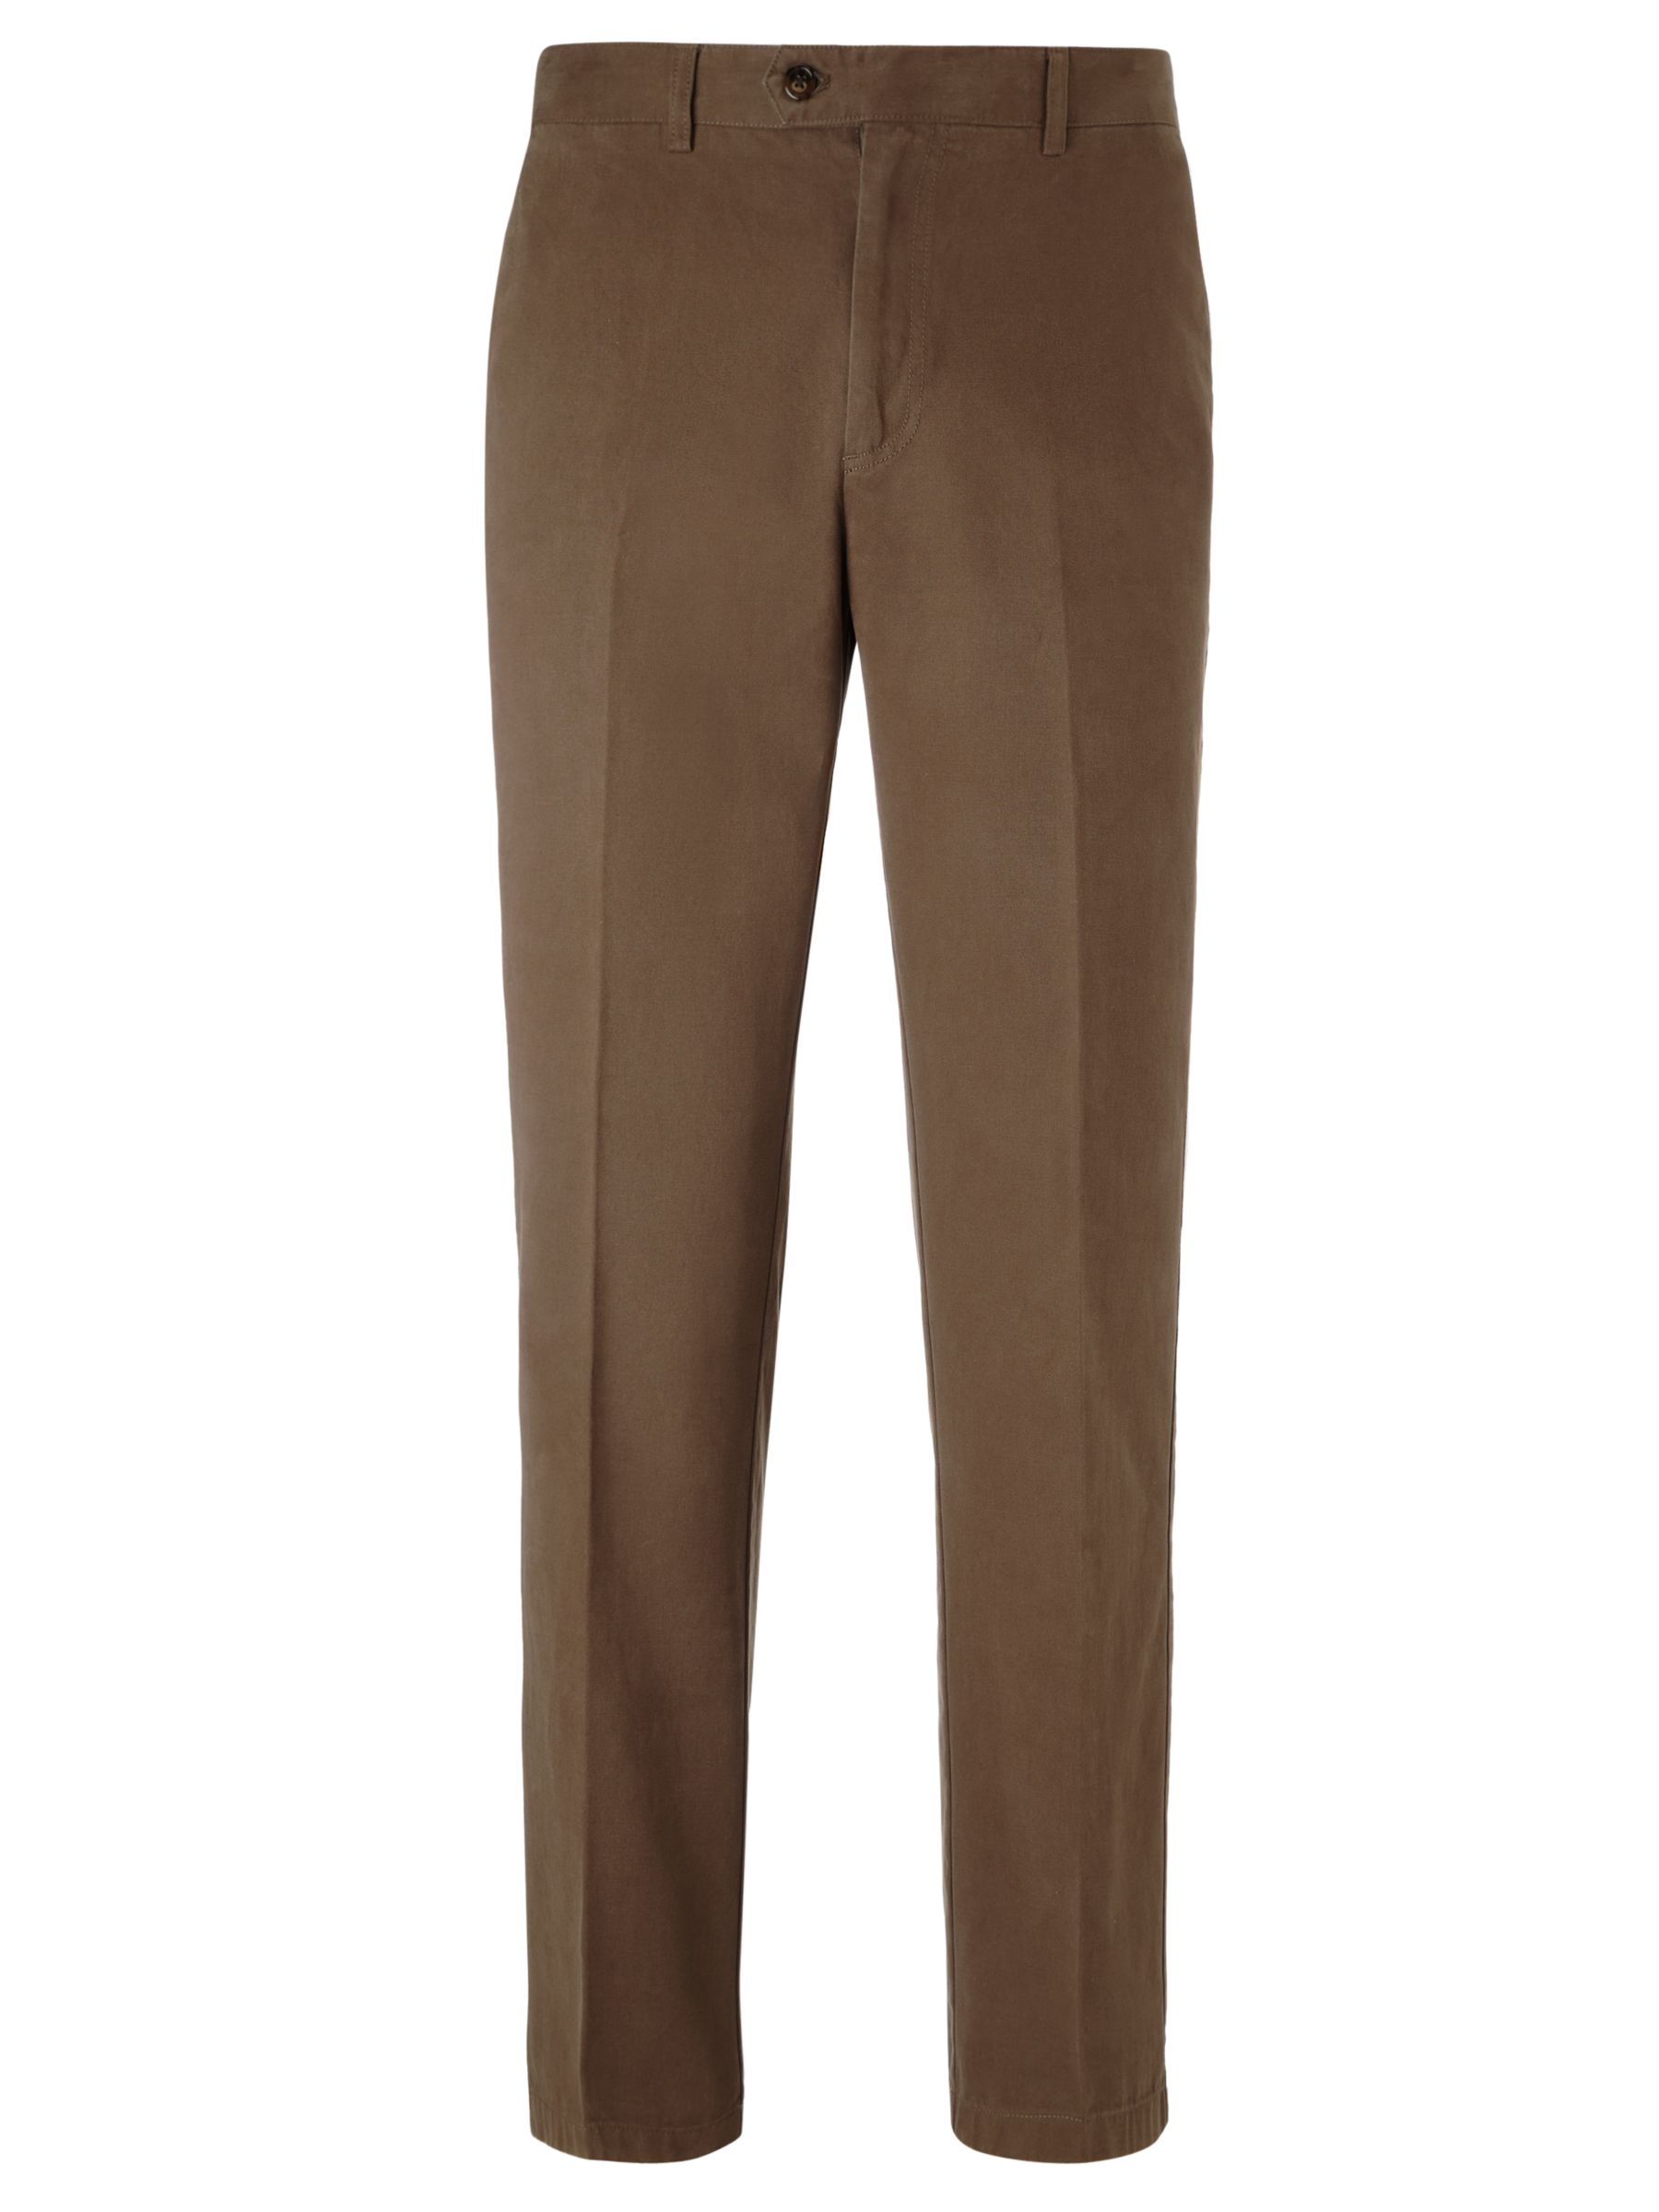 John Lewis & Partners Wrinkle Free Flat Front Trousers, Taupe, 34L